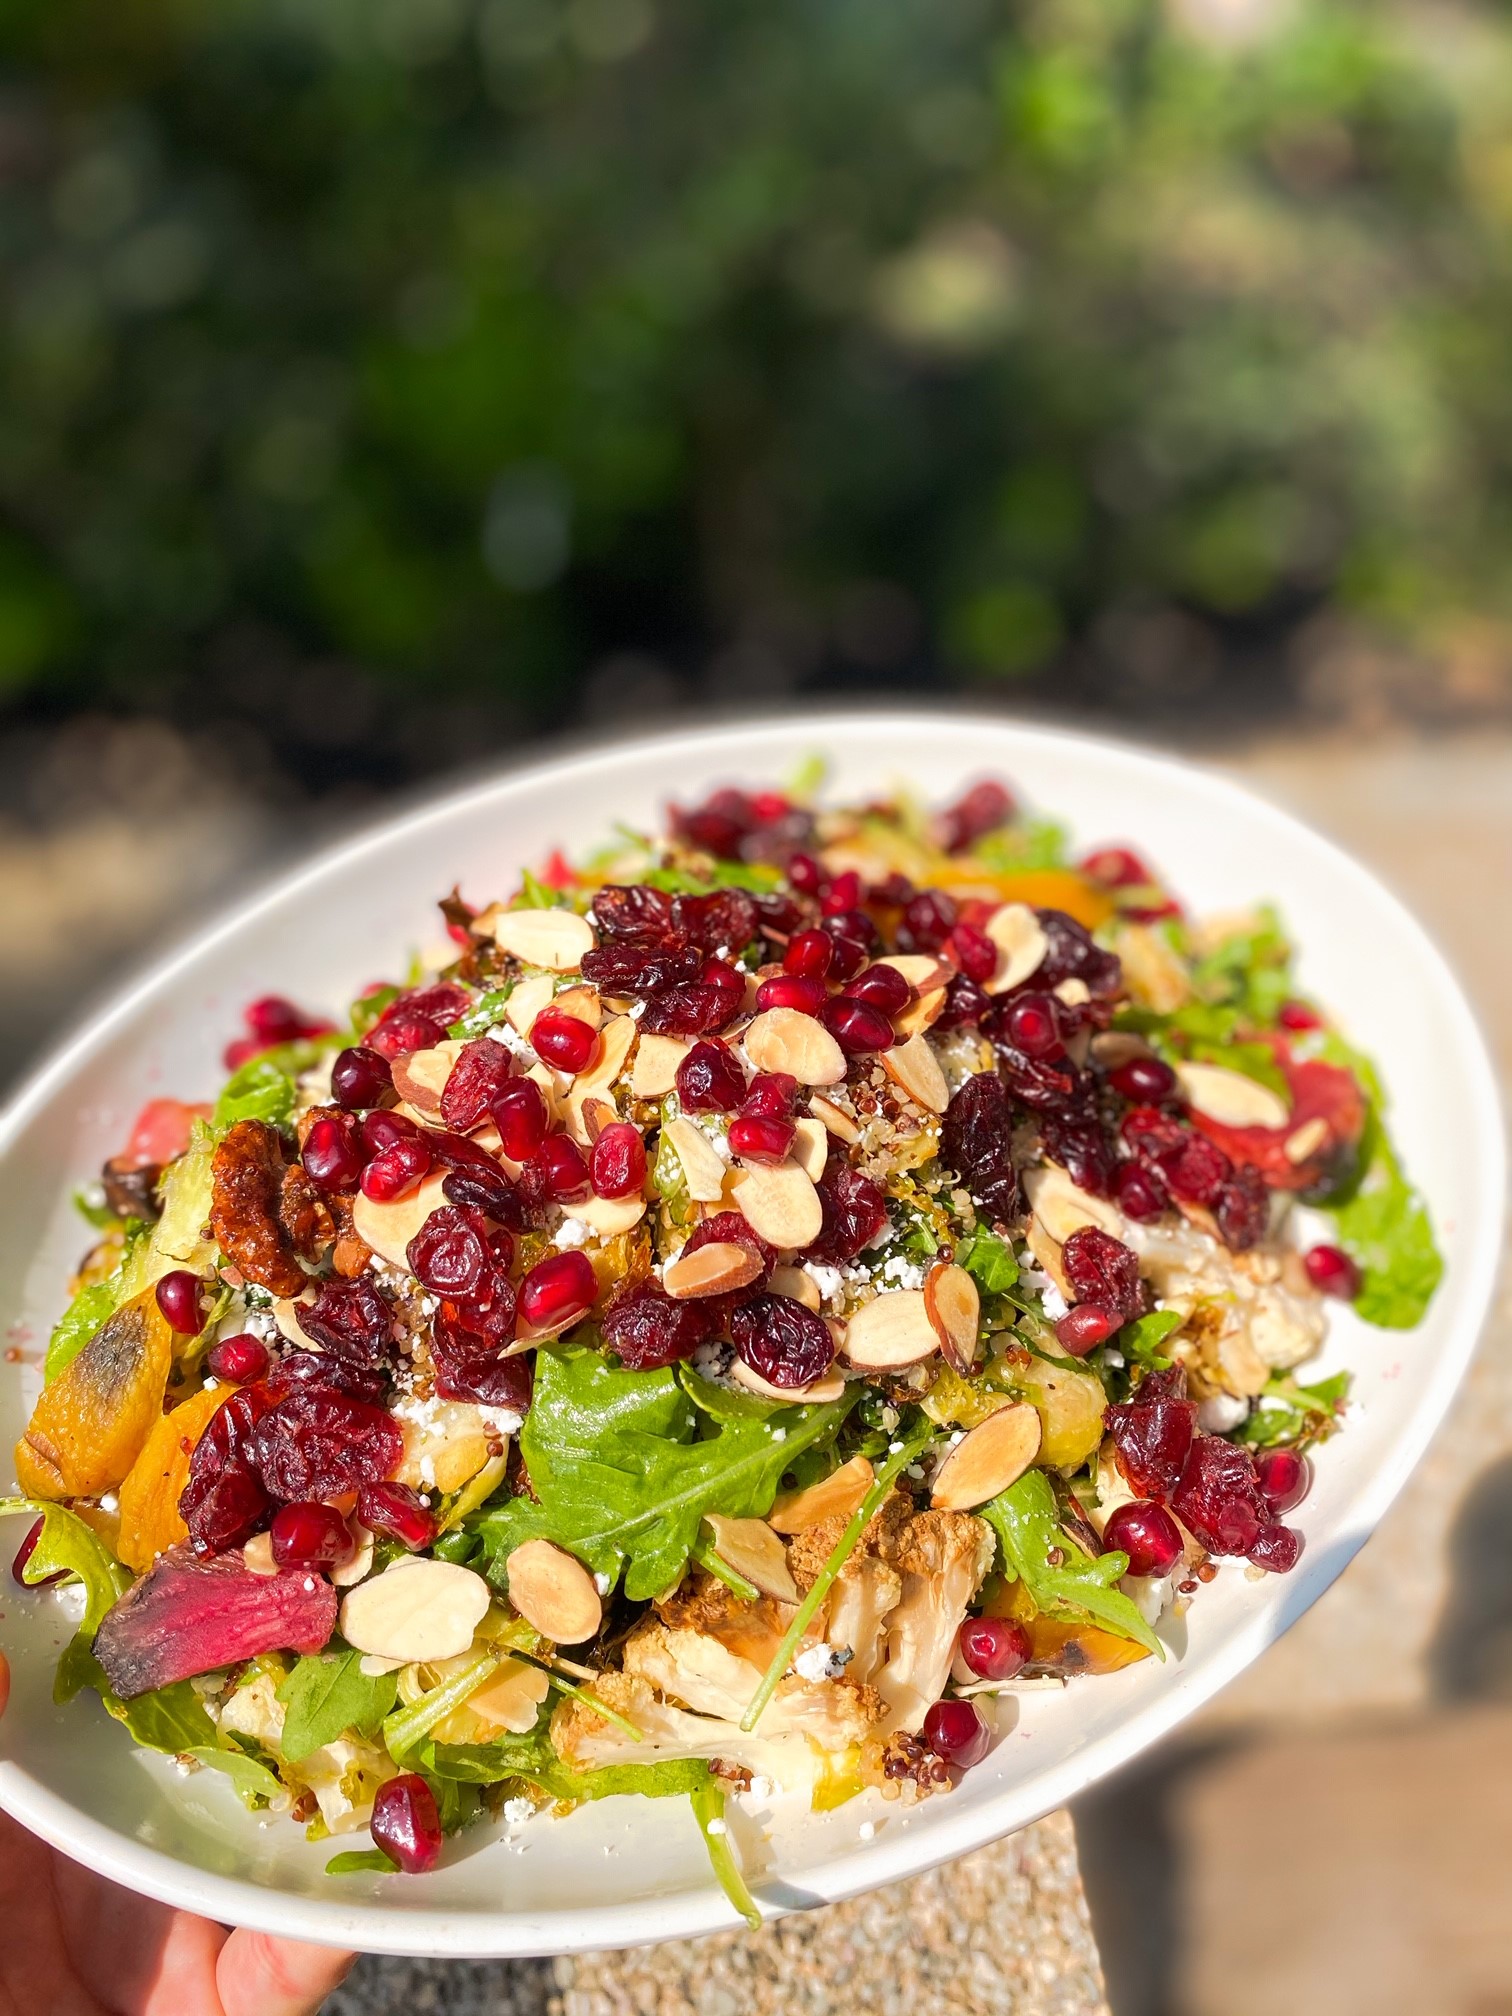 An Easy, Hearty Thanksgiving Salad Recipe for Your Family Table